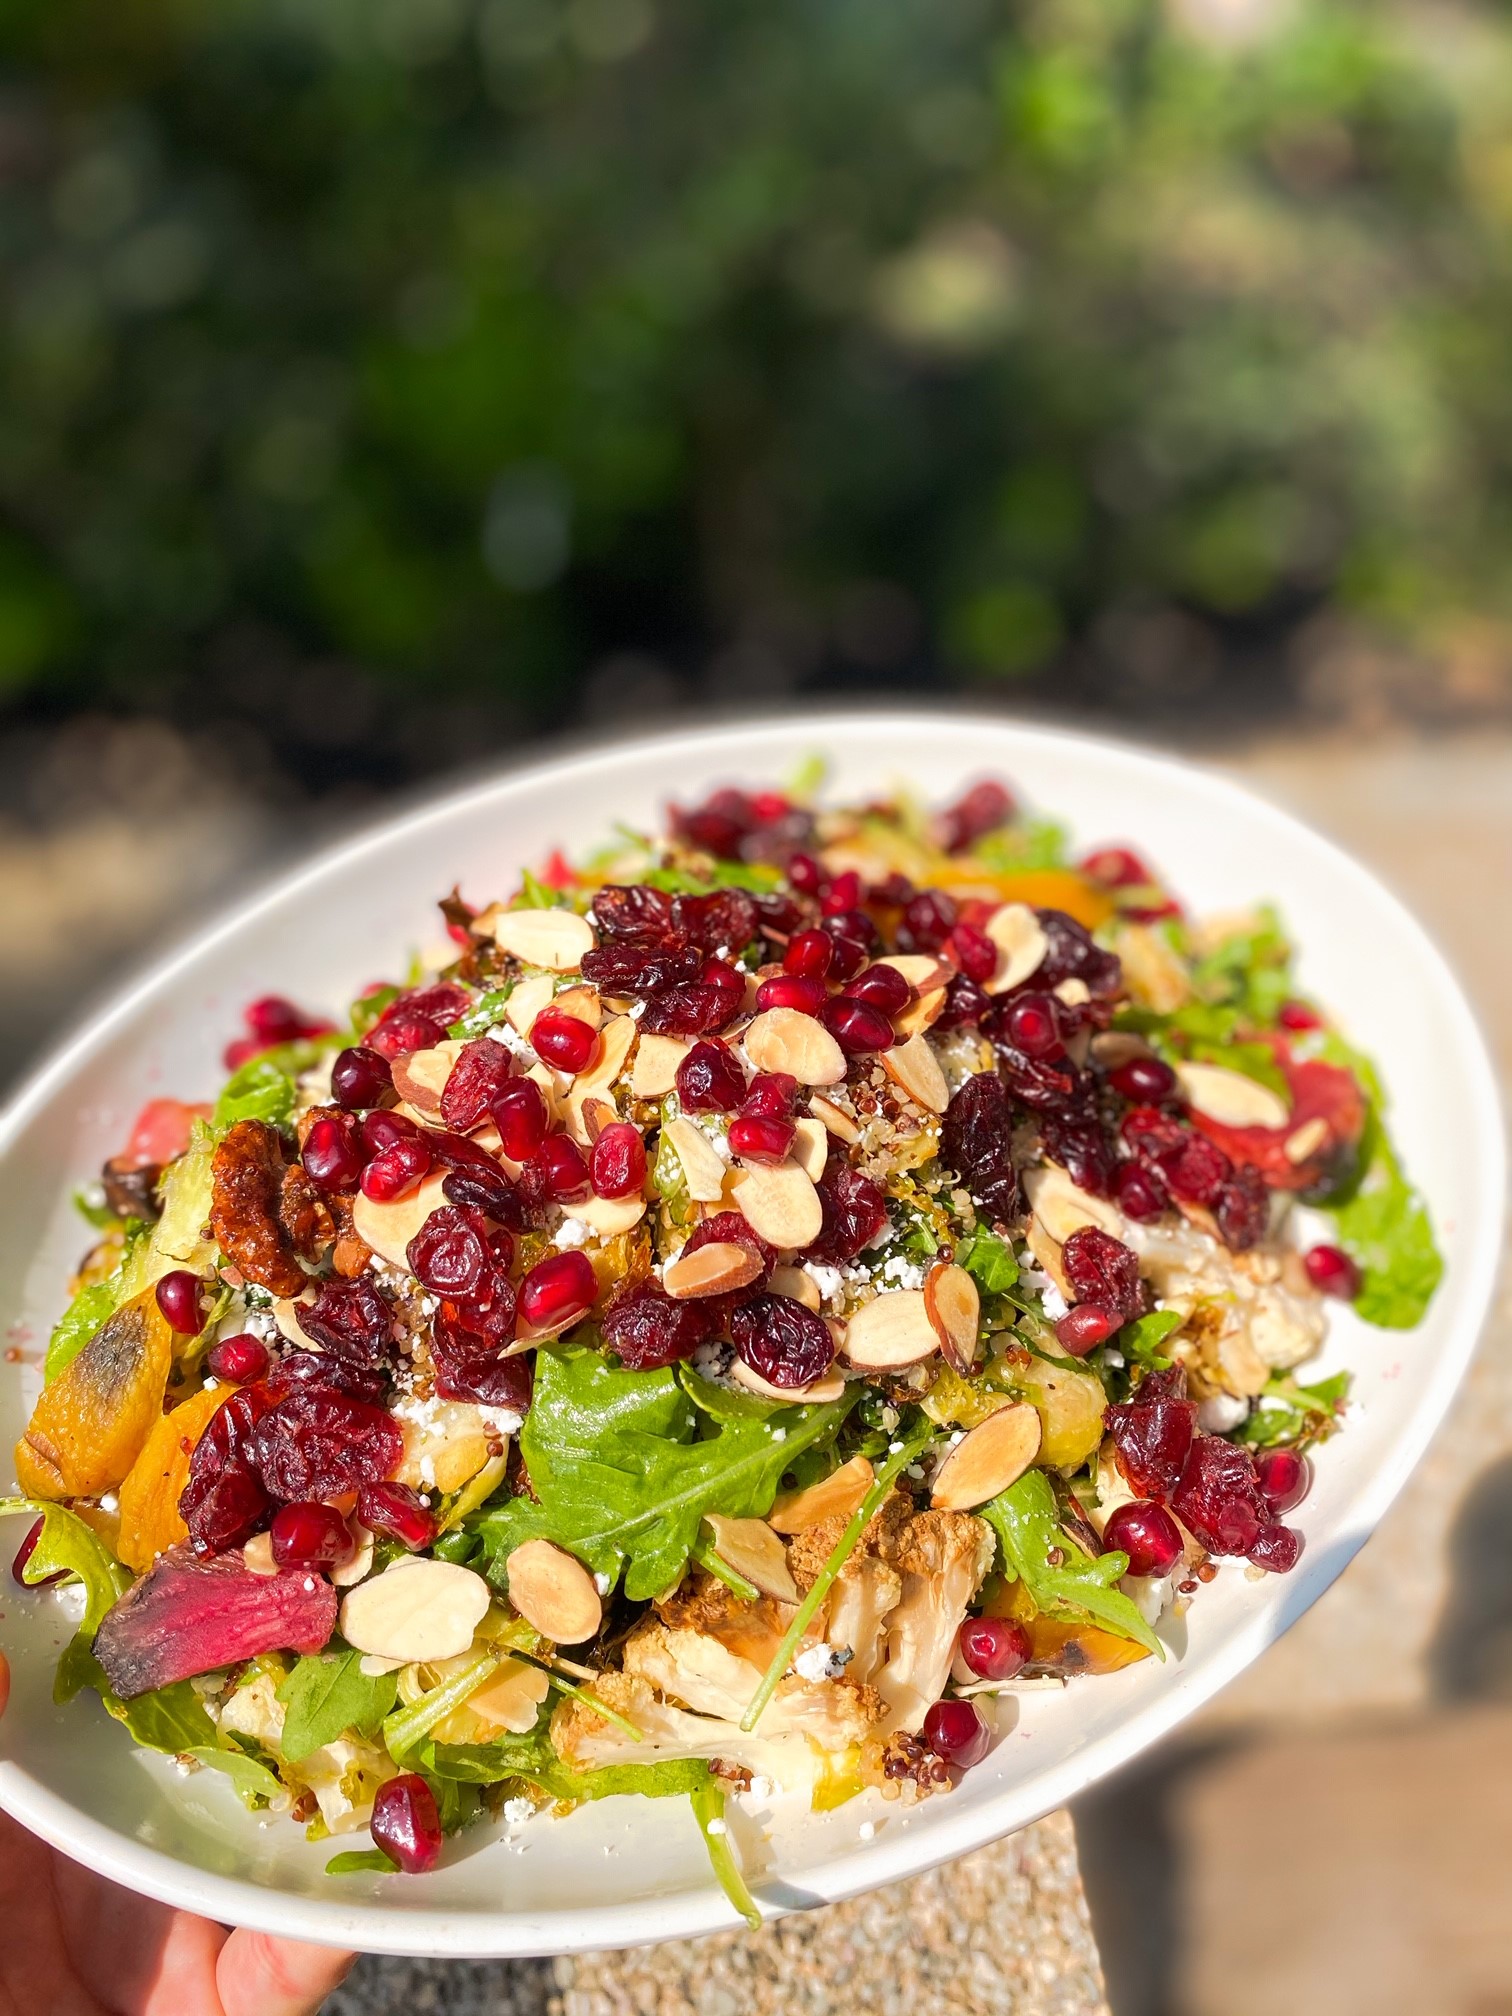 An Easy, Hearty Thanksgiving Salad Recipe for Your Family Table